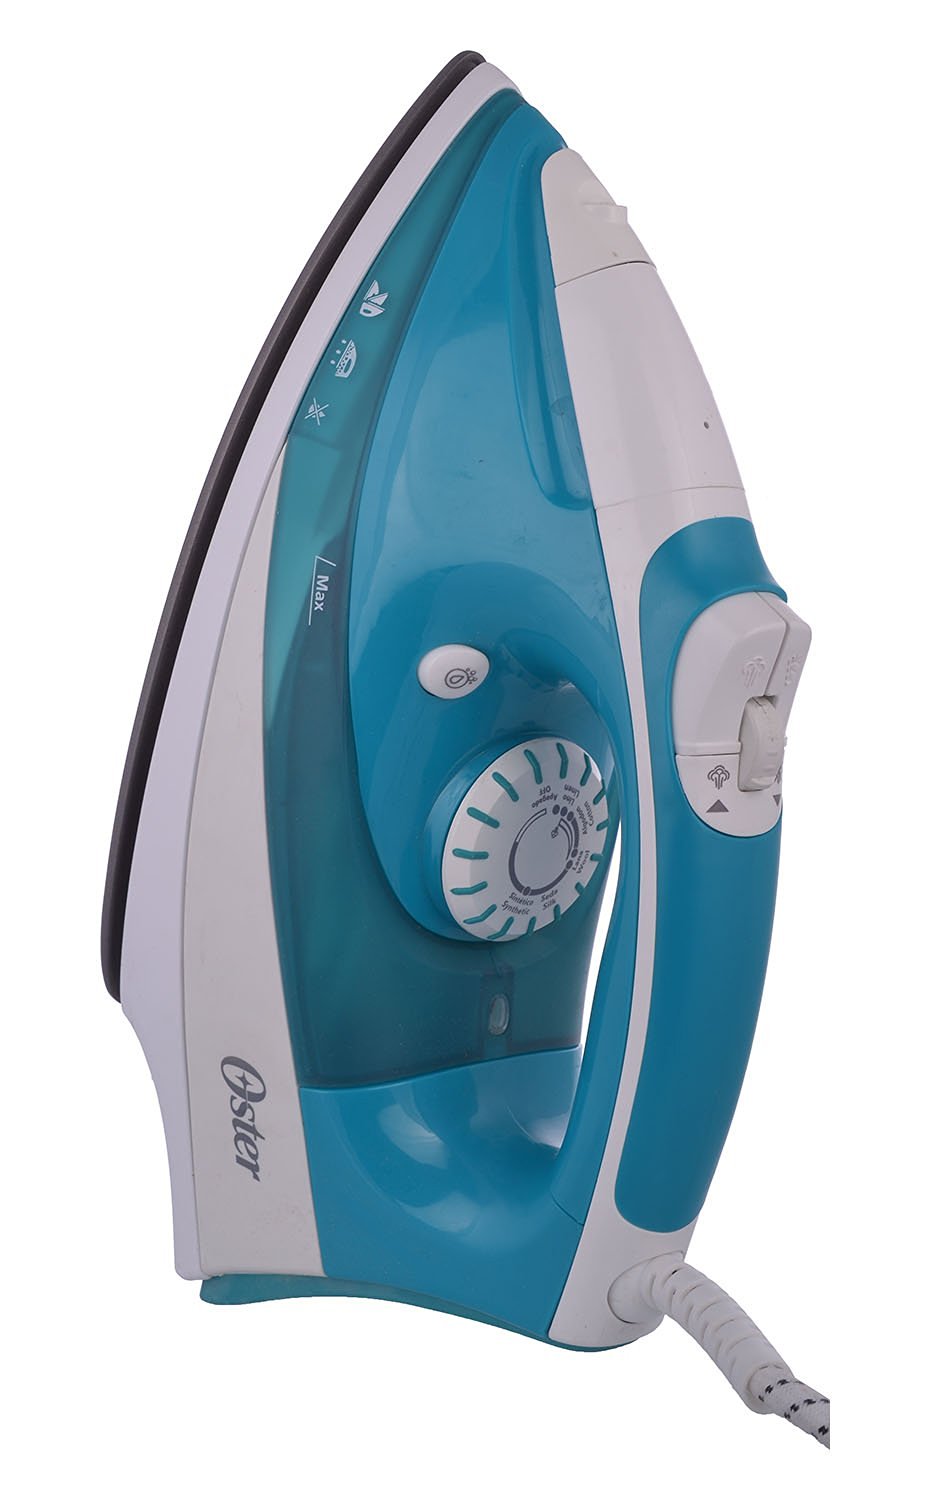 Oster Watt Steam Iron At Rs 1108 Only - Amazon